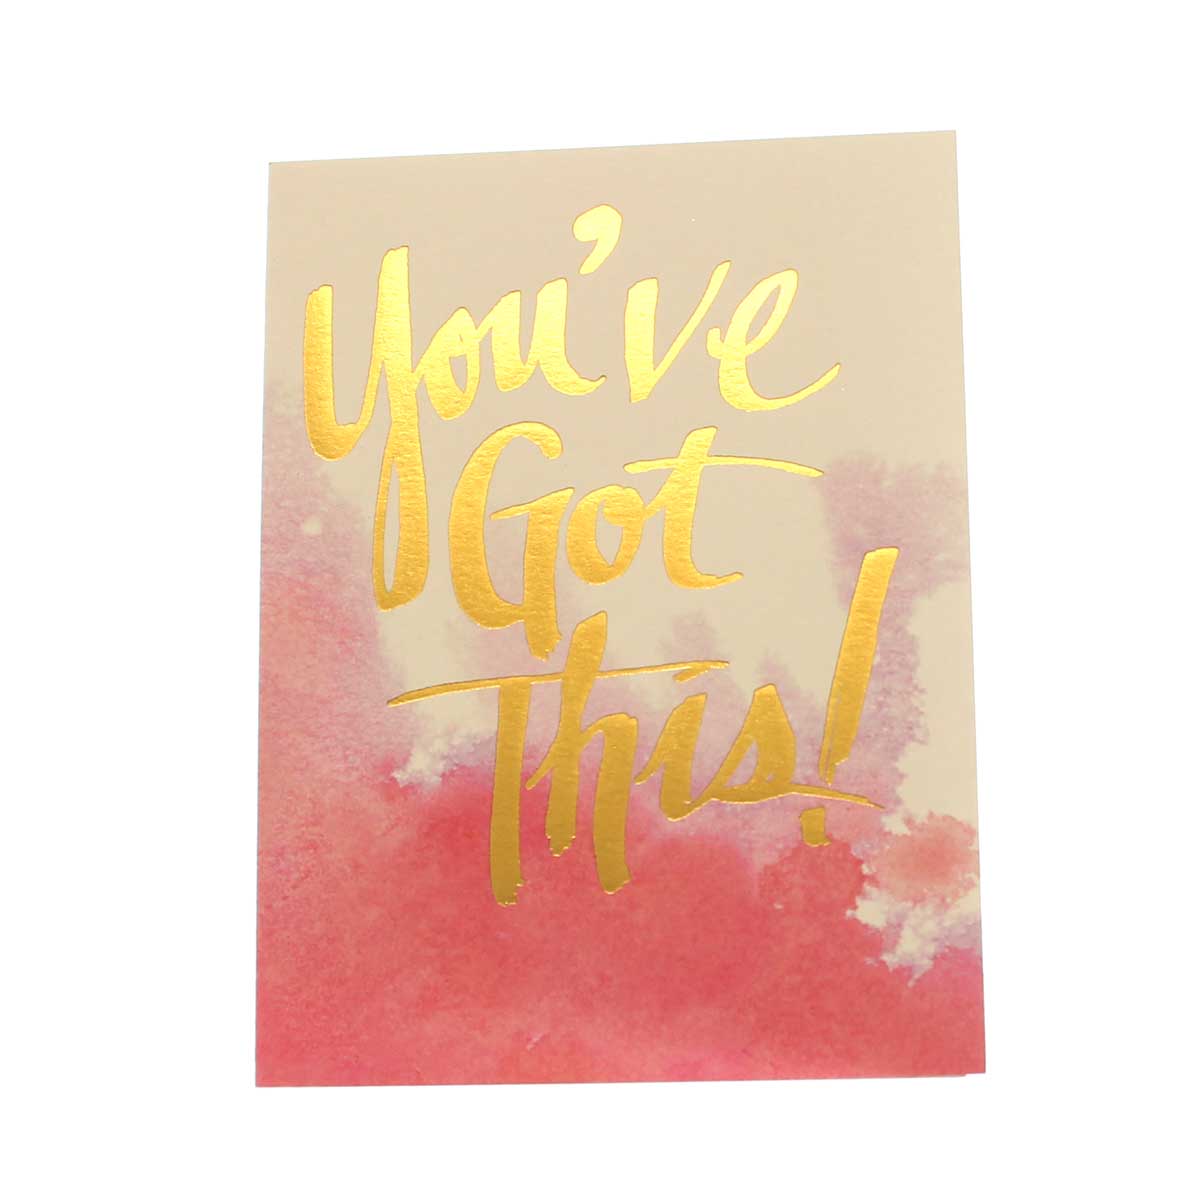 Encouragement & Support Card: "You've got this!"